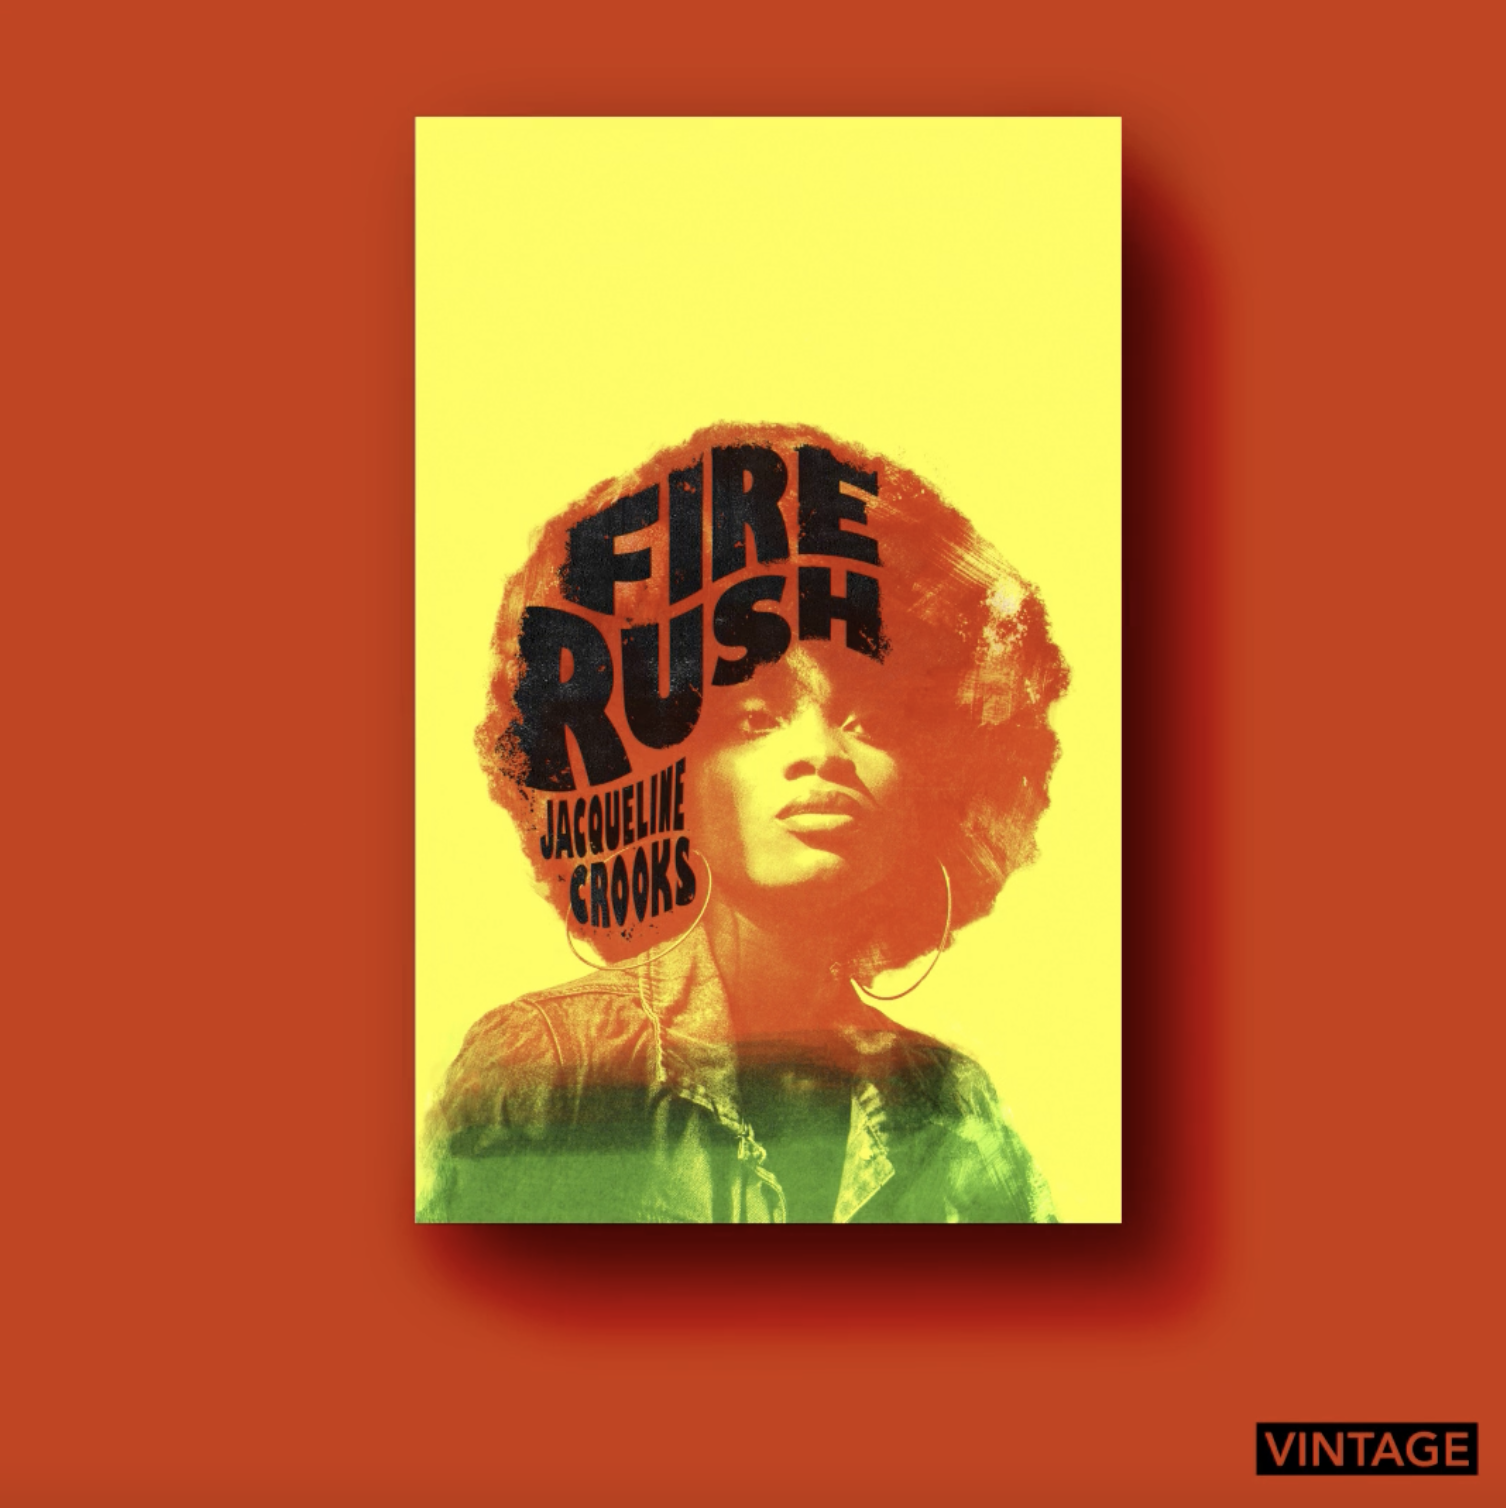 Cover image for Fire Rush by Jacqueline Crooks: red and green screenprint of woman with afro and hoop earrings on yellow background.